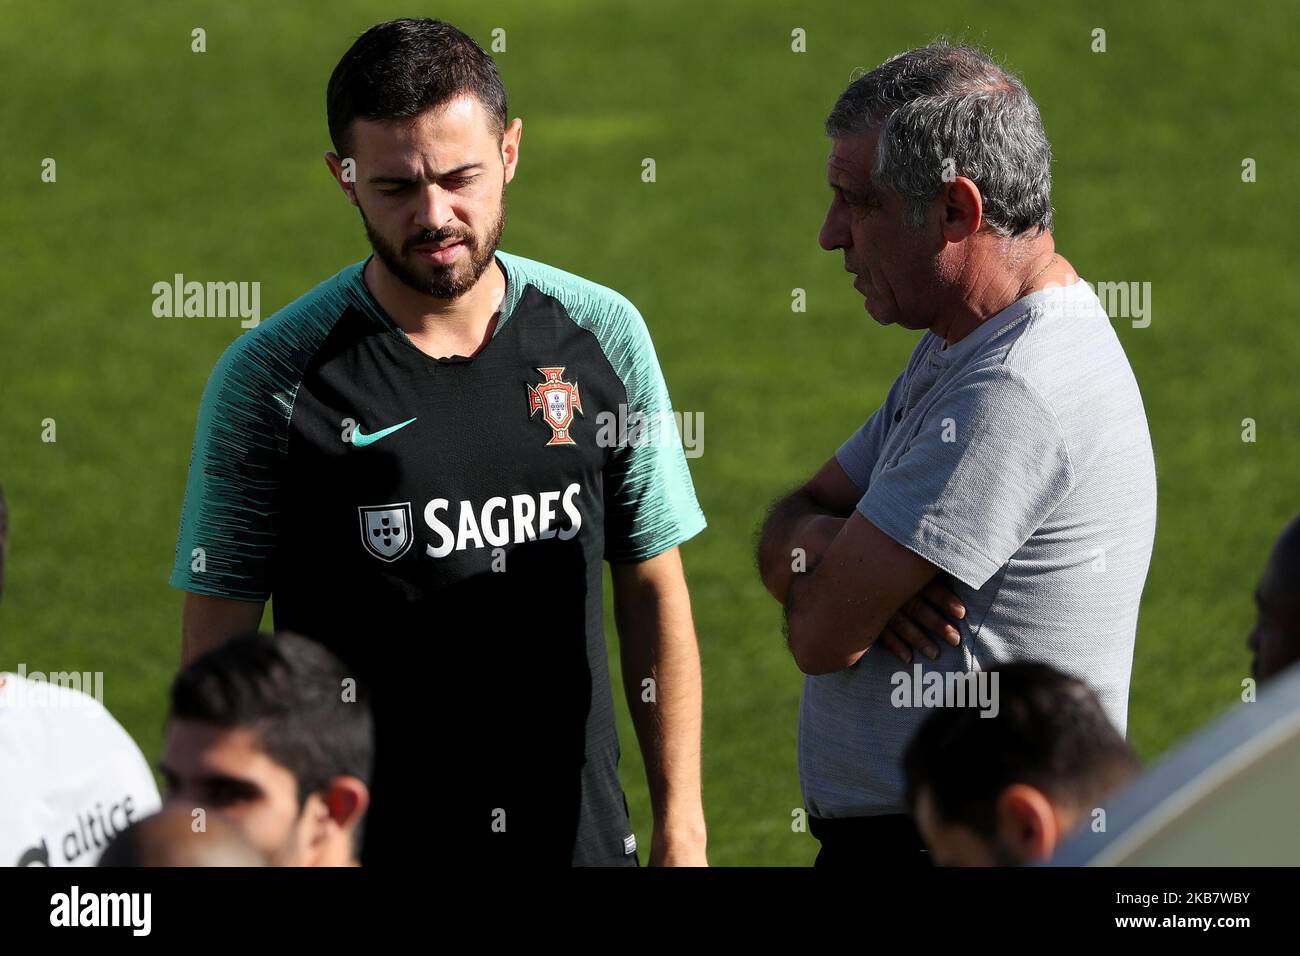 Portugal's forward Bernardo Silva (L) chats with Portugal's head coach Fernando Santos action during a training session at Cidade do Futebol (Football City) training camp in Oeiras, outskirts of Lisbon, Portugal, on October 8, 2019, ahead of the UEFA EURO 2020 qualifier matches against Luxembourg and Ukraine. (Photo by Pedro FiÃºza/NurPhoto) Stock Photo